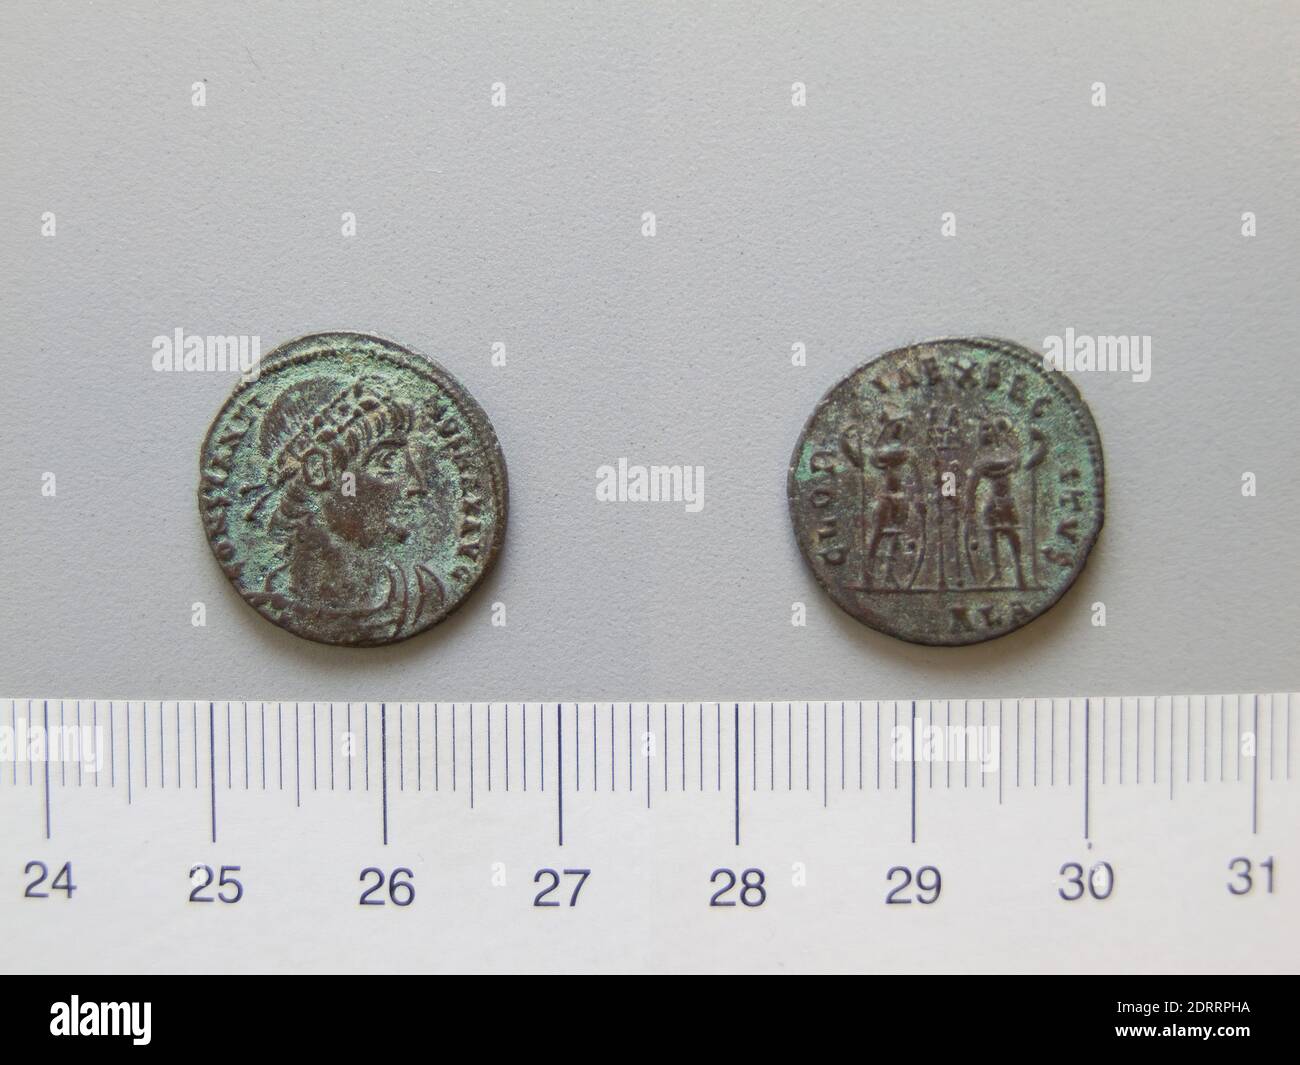 Ruler: Constantine I, Emperor of Rome, A.D. 285–337, ruled A.D. 306–337, Mint: Alexandria, 1 Nummus of Constantine I, Emperor of Rome from Alexandria, 335–37, Argentiferous bronze, 2.54 g, 11:00, 18.2 mm, Made in Alexandria, Egypt, Roman, 4th century, Numismatics Stock Photo